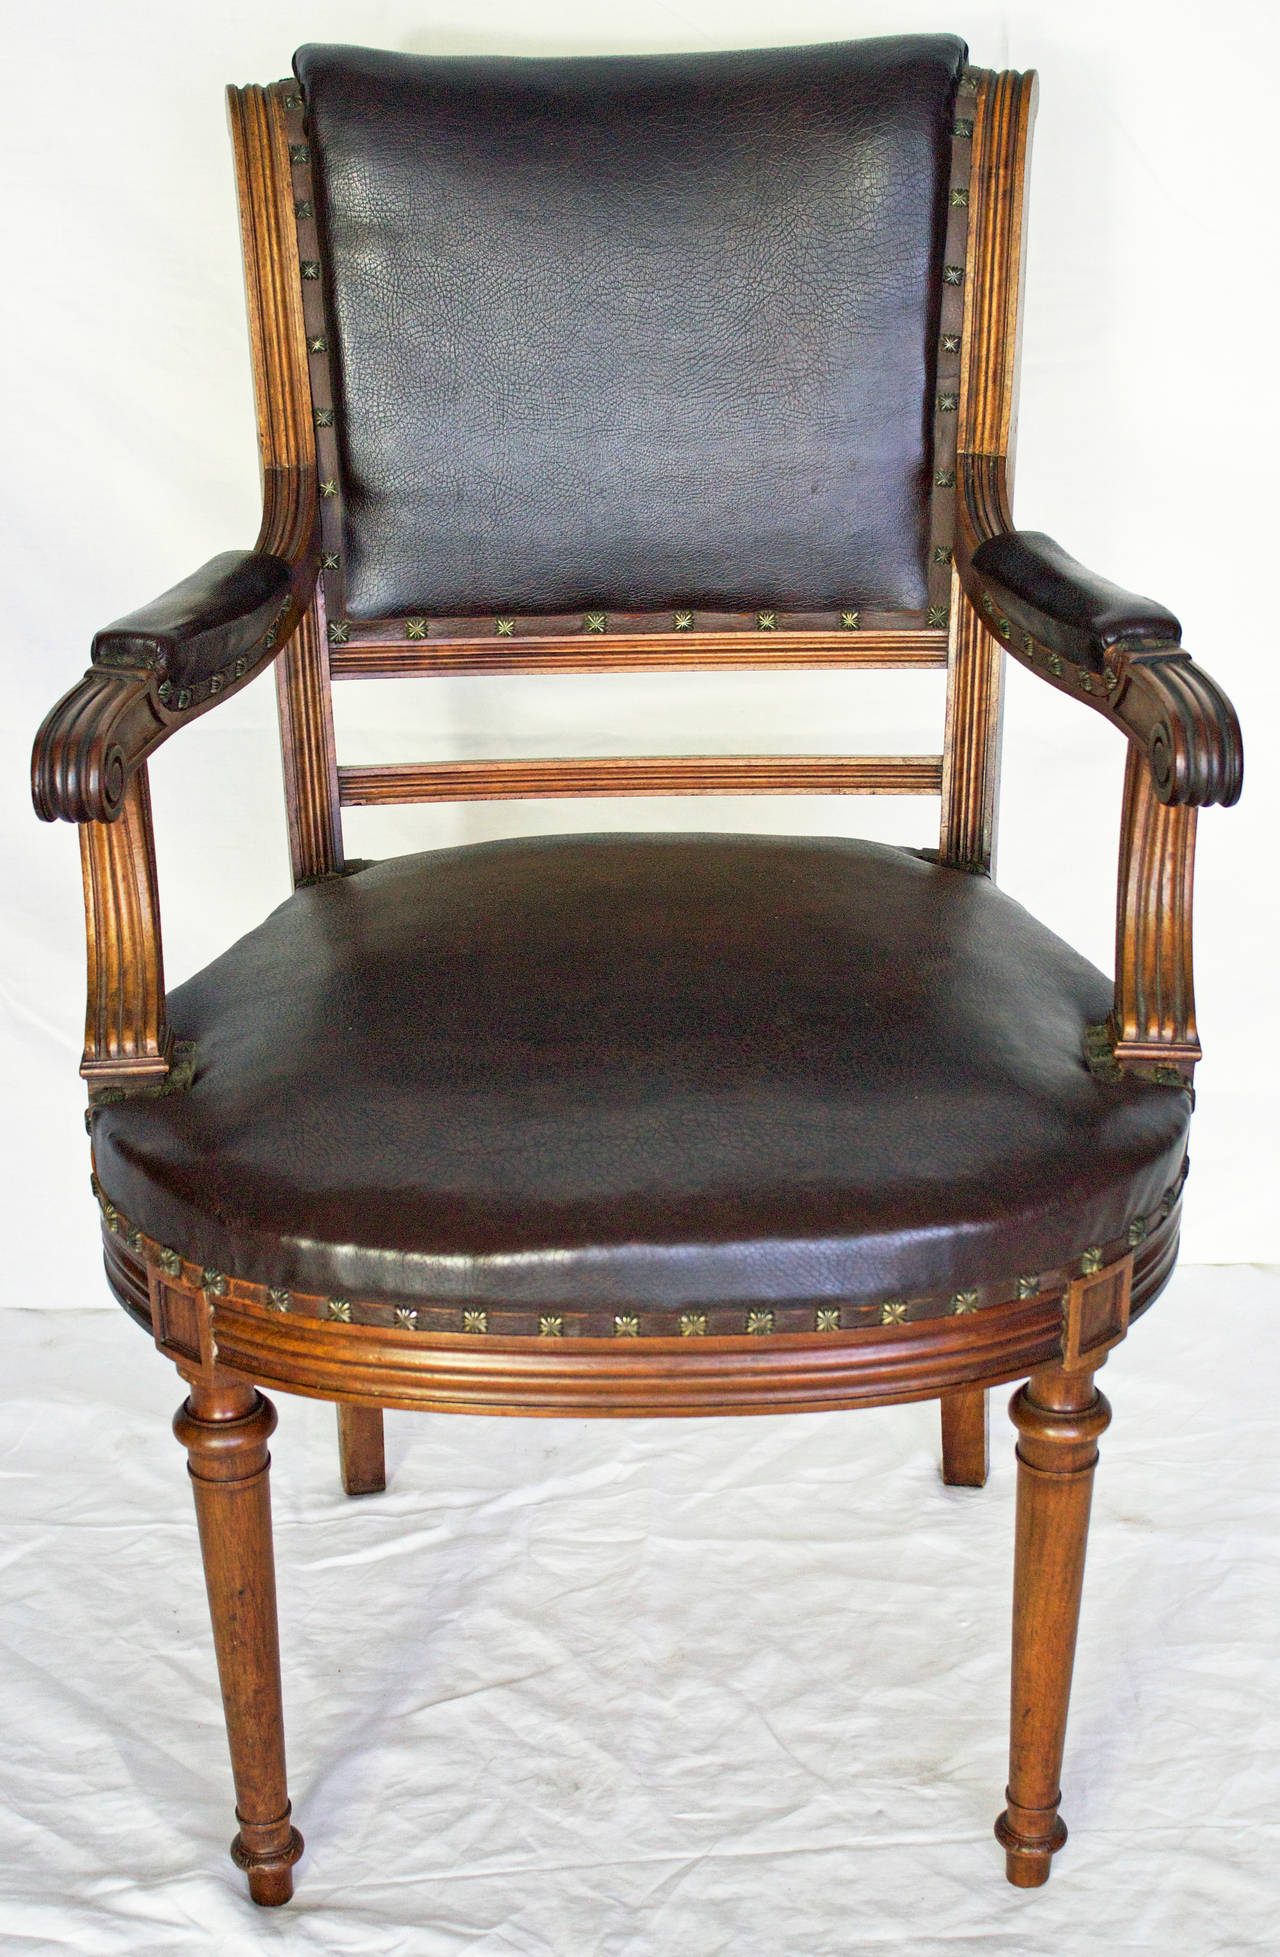 Handsome and comfortable desk armchair in walnut done by the end of 19th century in a Louis XVI style with its fluted woodwork on backrest, armrests, their supports and the seat crosspiece. Light saber shape for the back legs when the front legs are